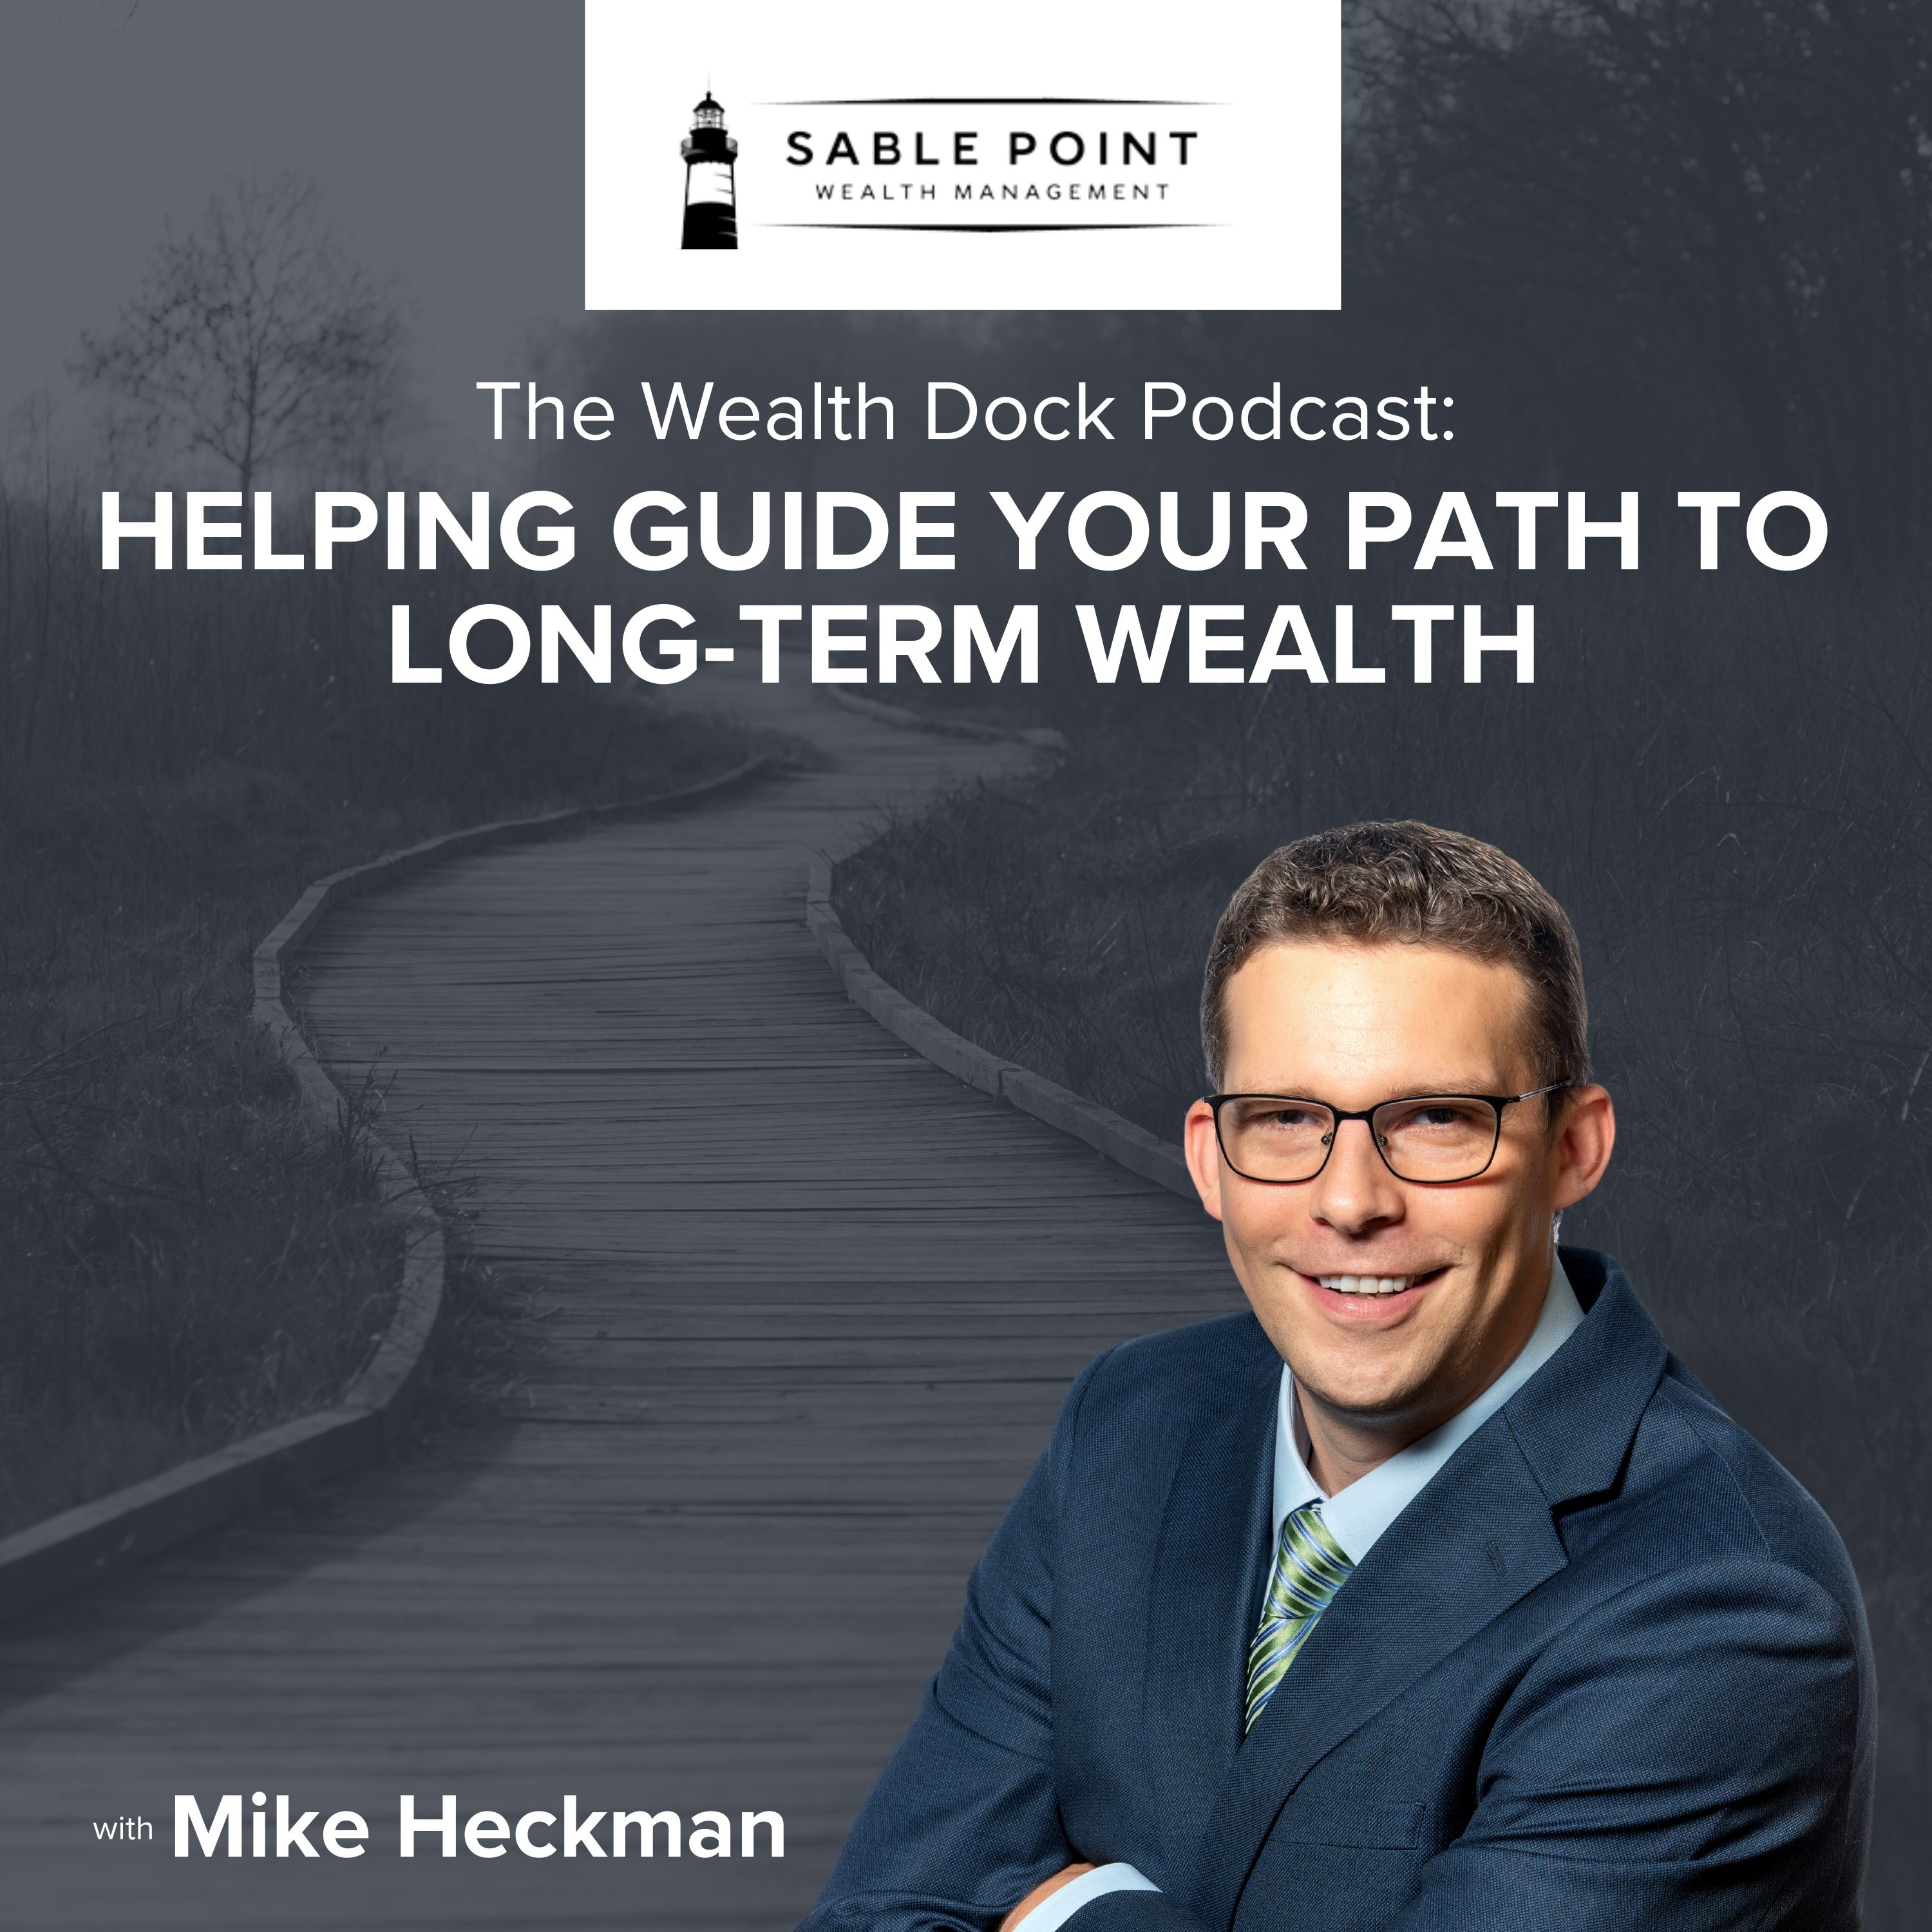 The Wealth Dock Podcast: Helping guide your path to long-term wealth